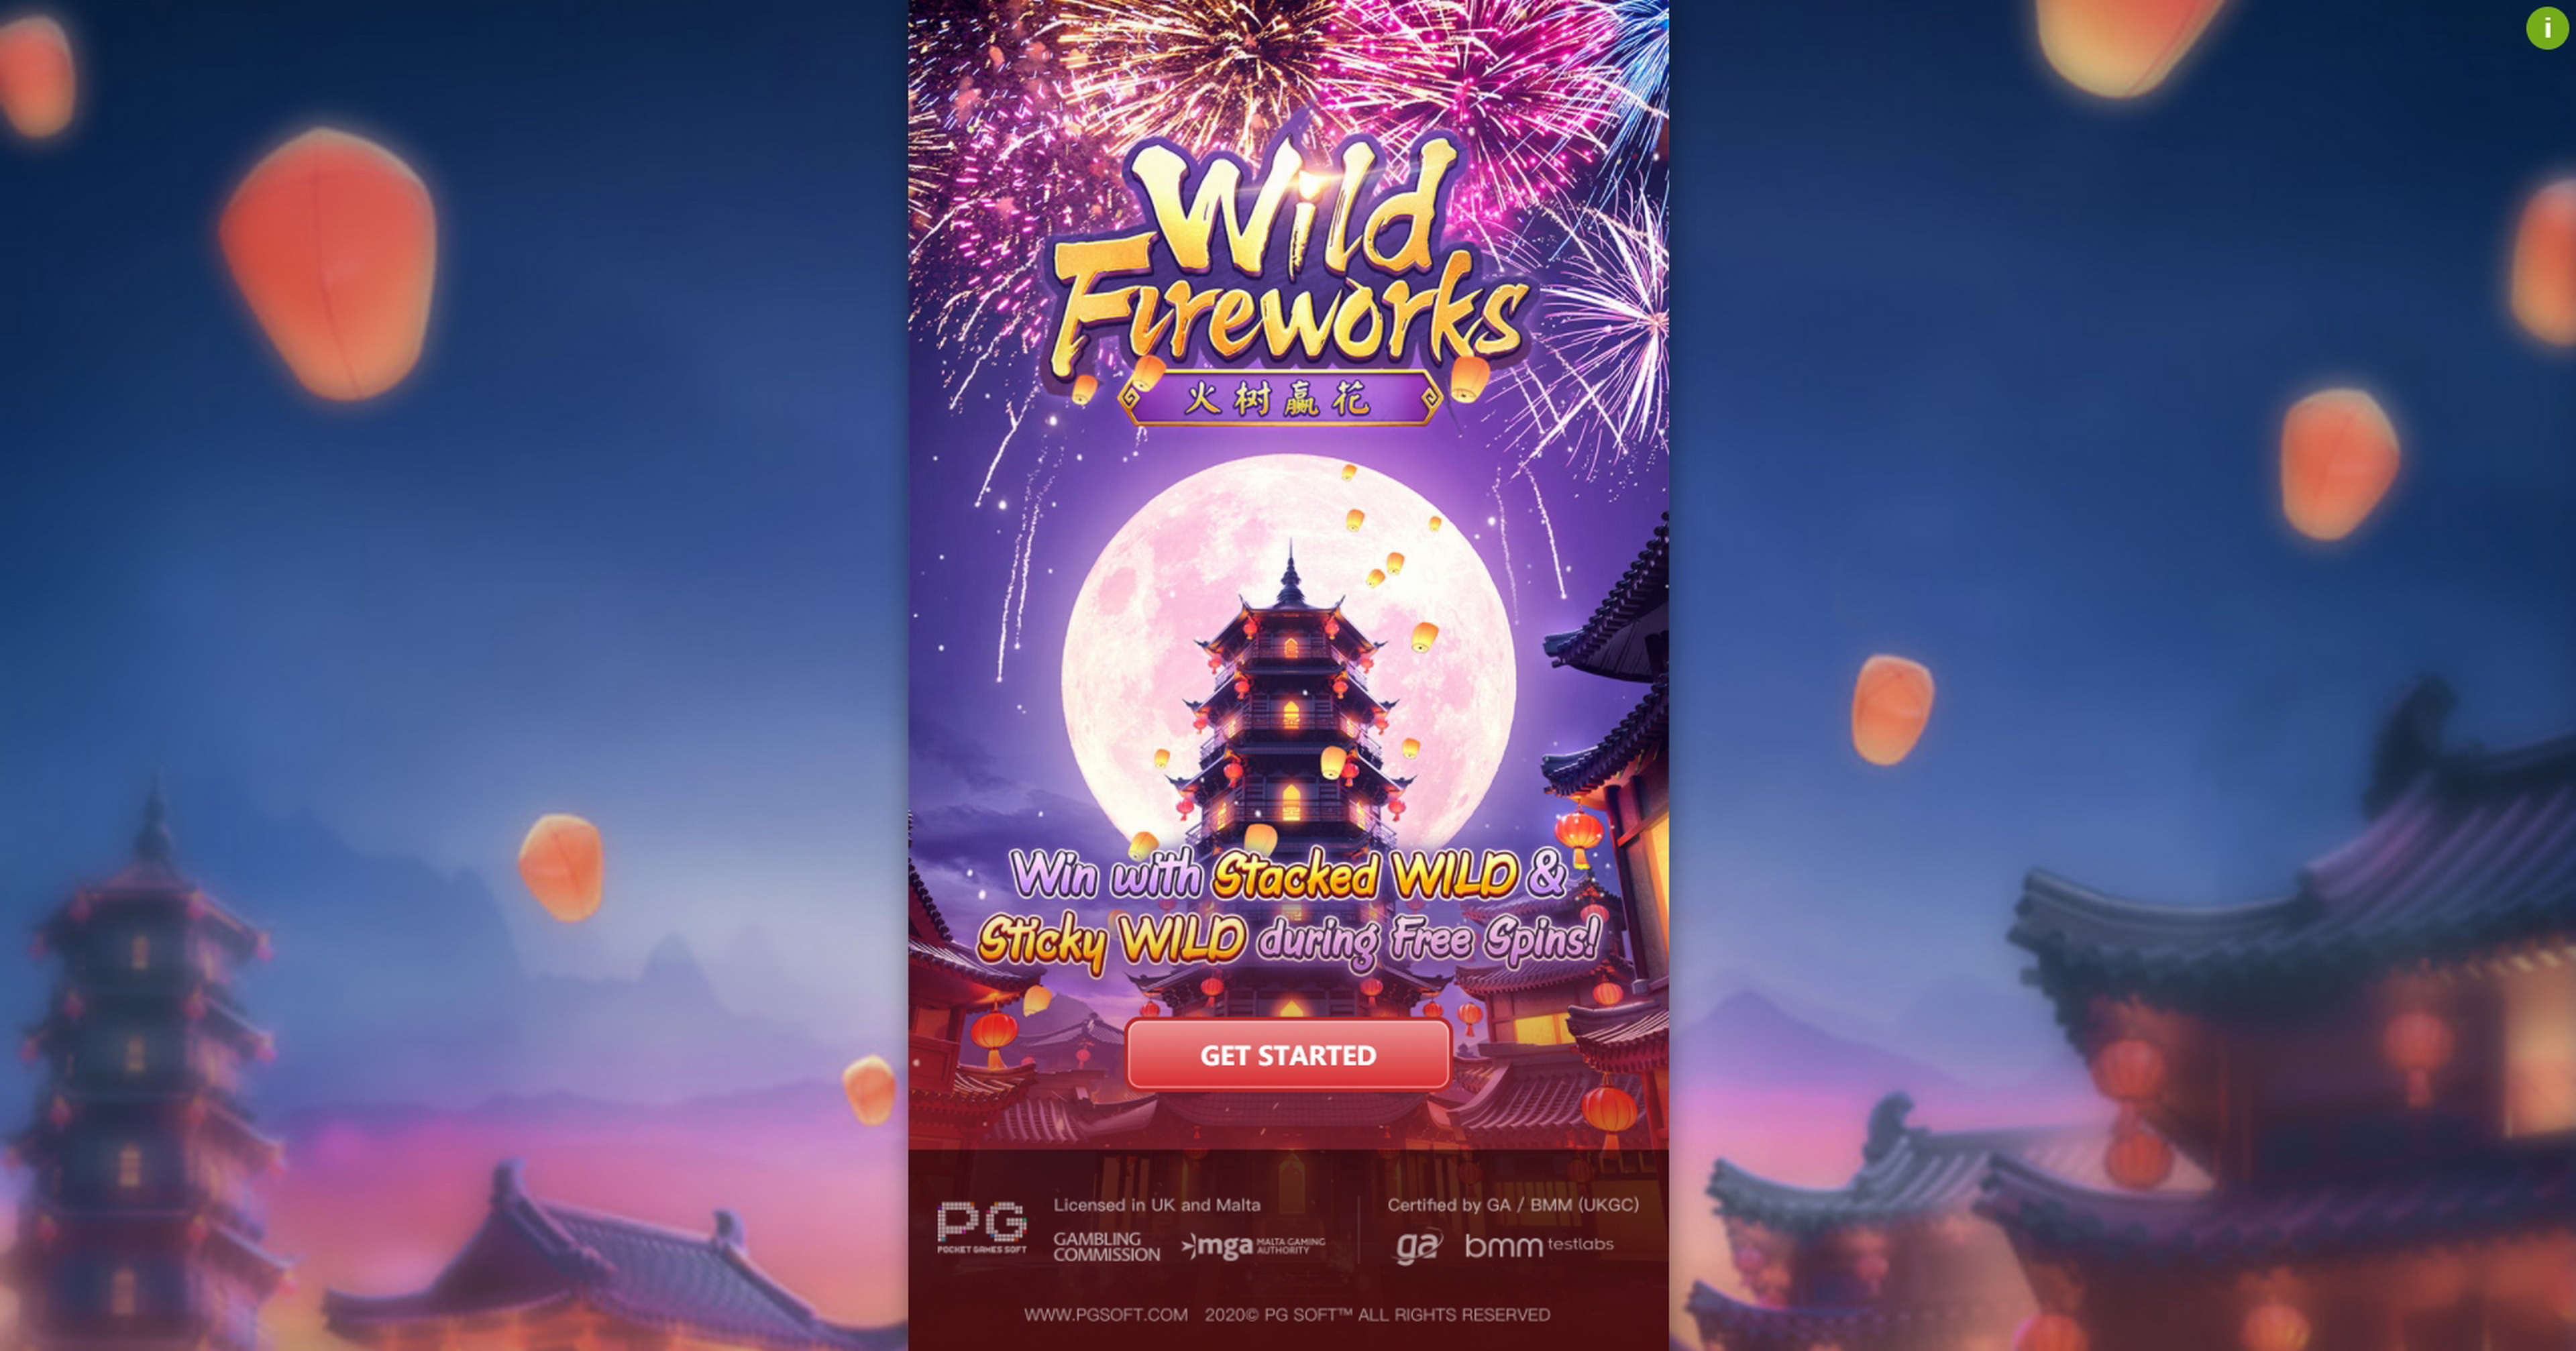 Play Wild Fireworks Free Casino Slot Game by PG Soft